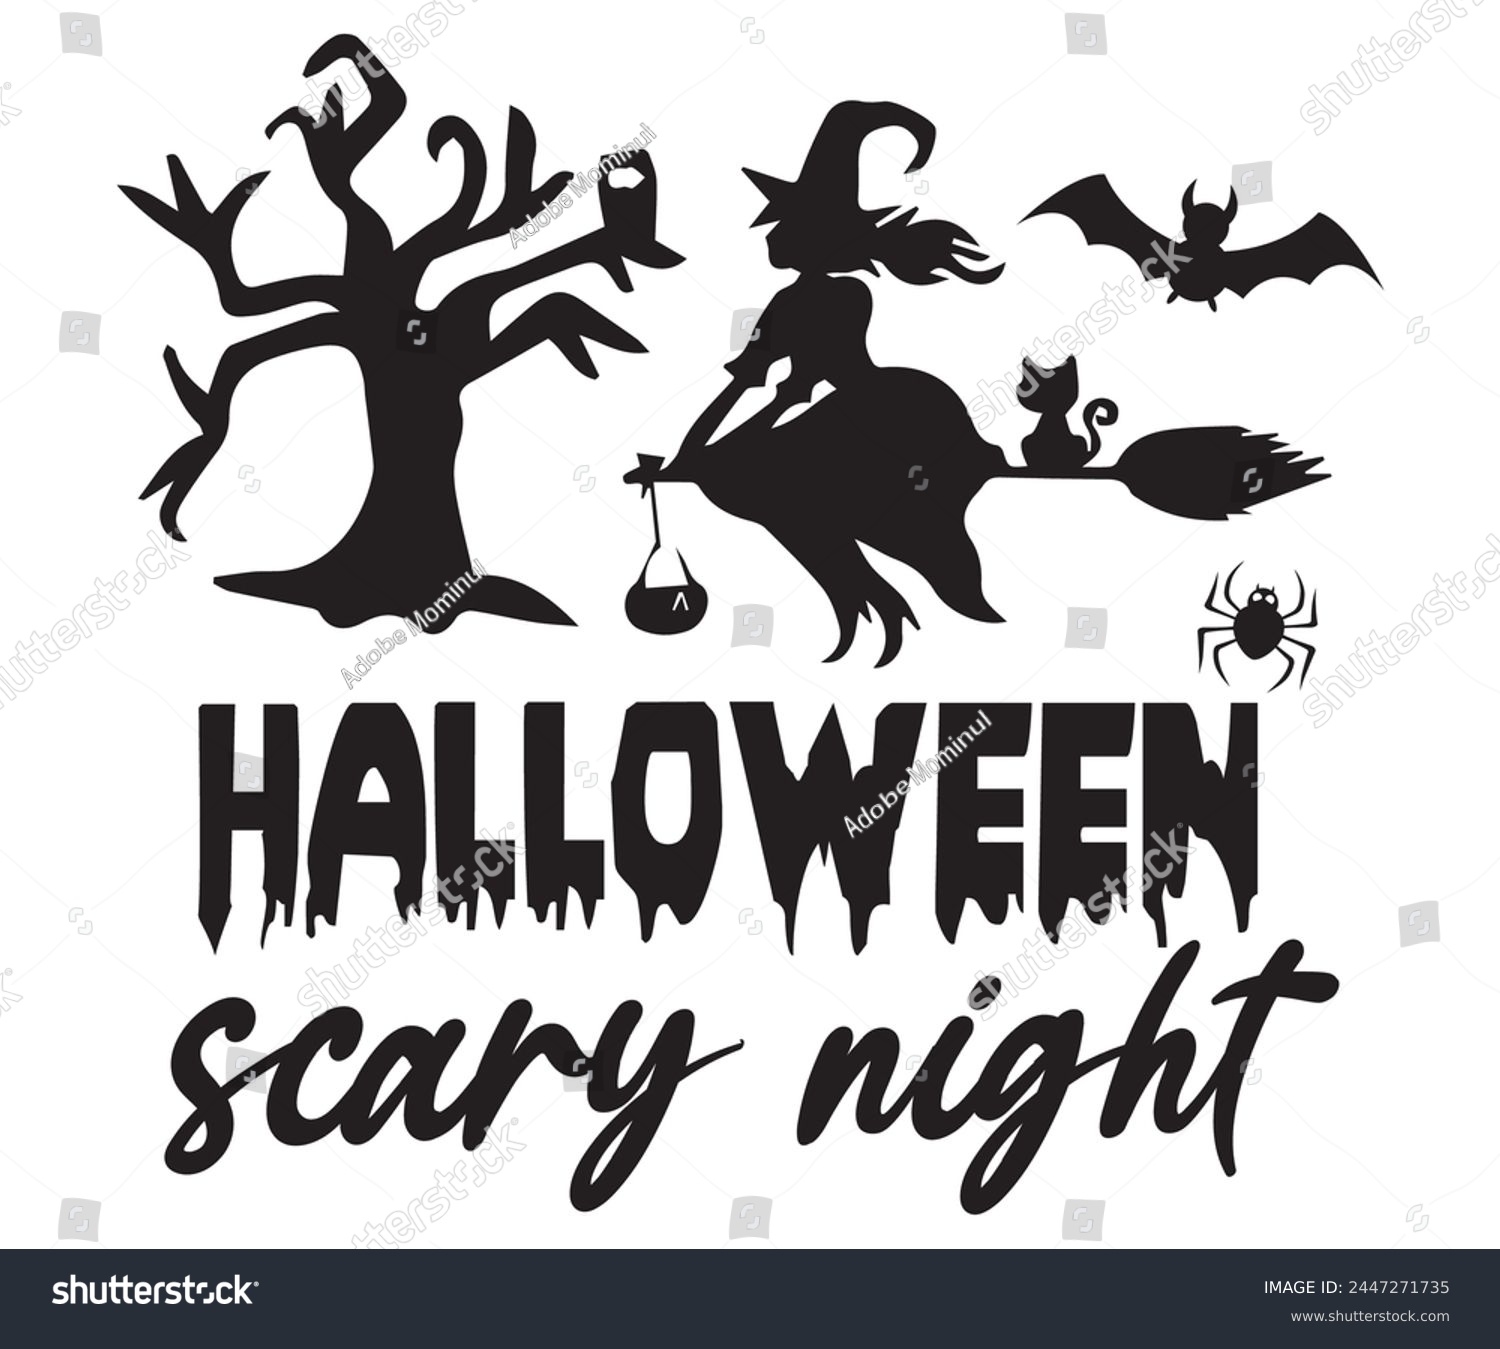 SVG of Halloween Scary Night,Halloween Svg,Typography,Halloween Quotes,Witches Svg,Halloween Party,Halloween Costume,Halloween Gift,Funny Halloween,Spooky Svg,Funny T shirt,Ghost Svg,Cut file svg